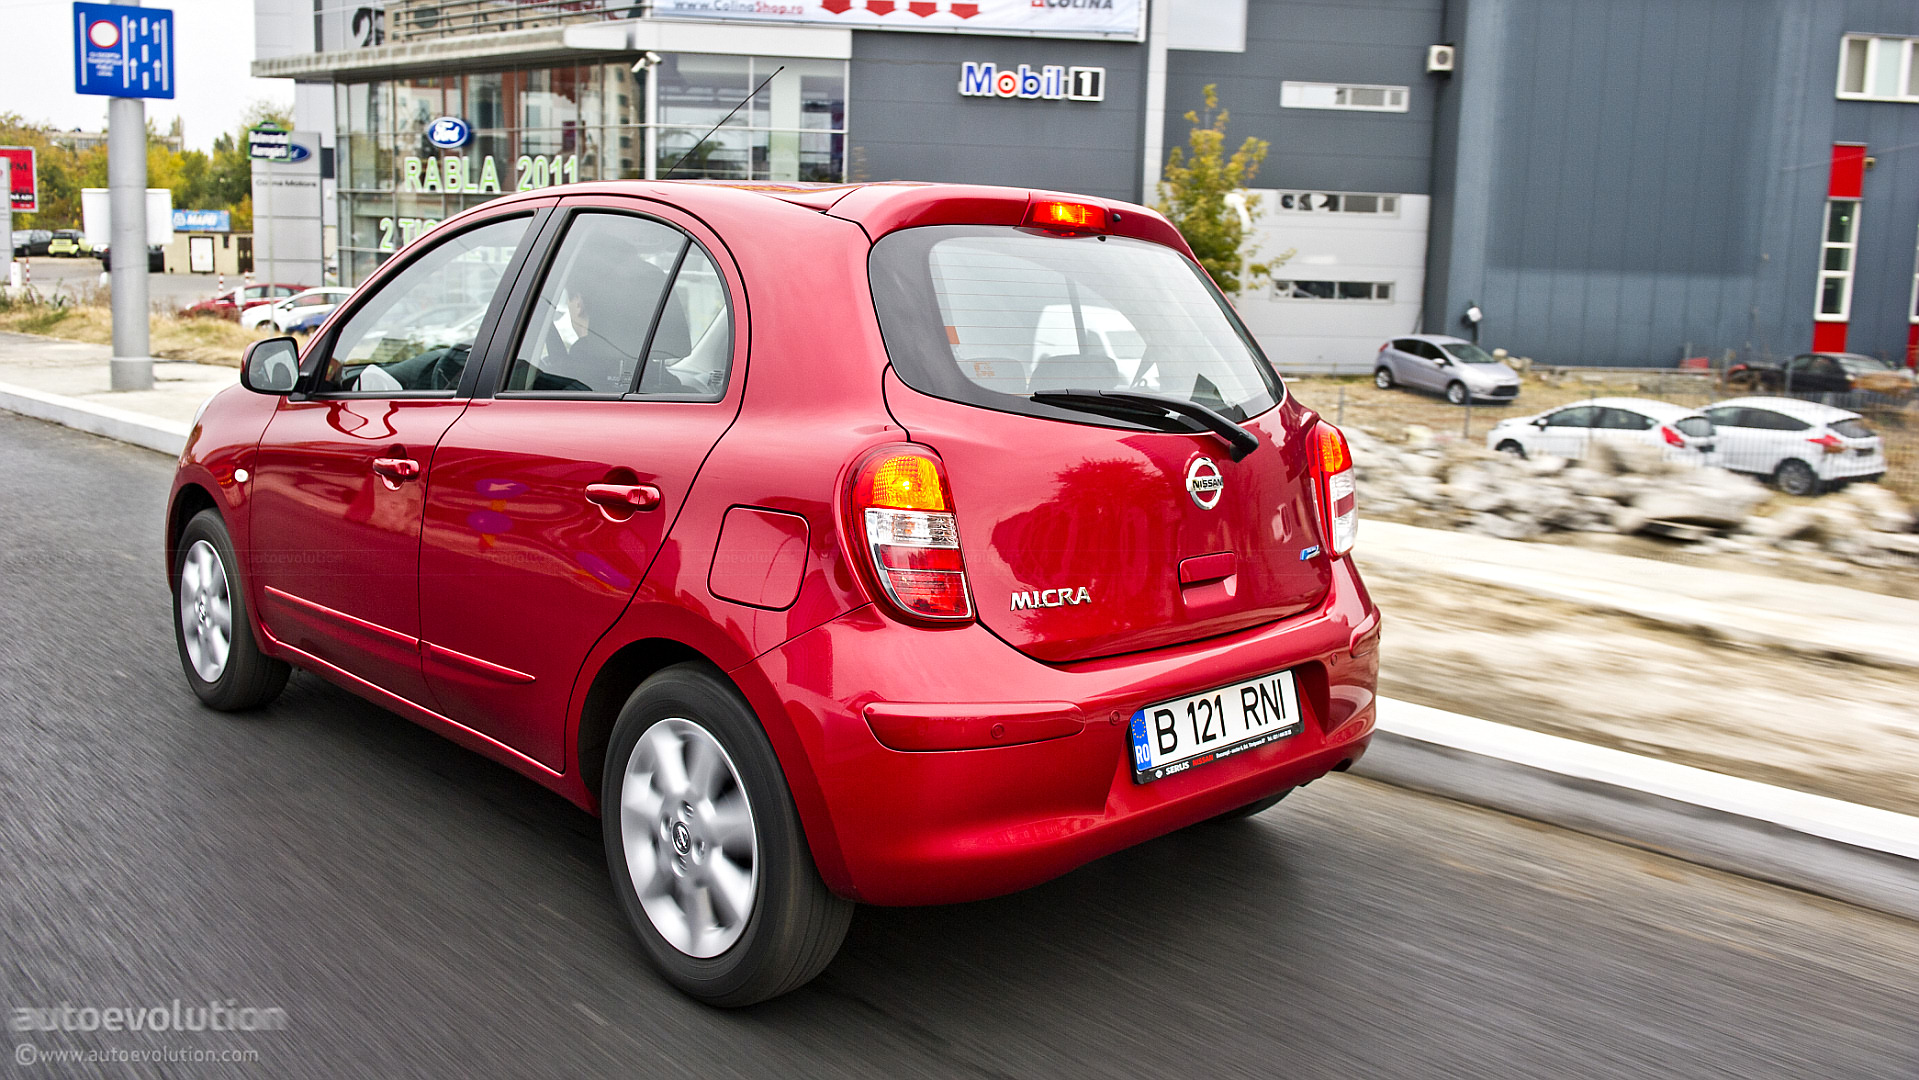 2011 Nissan micra safety rating #1